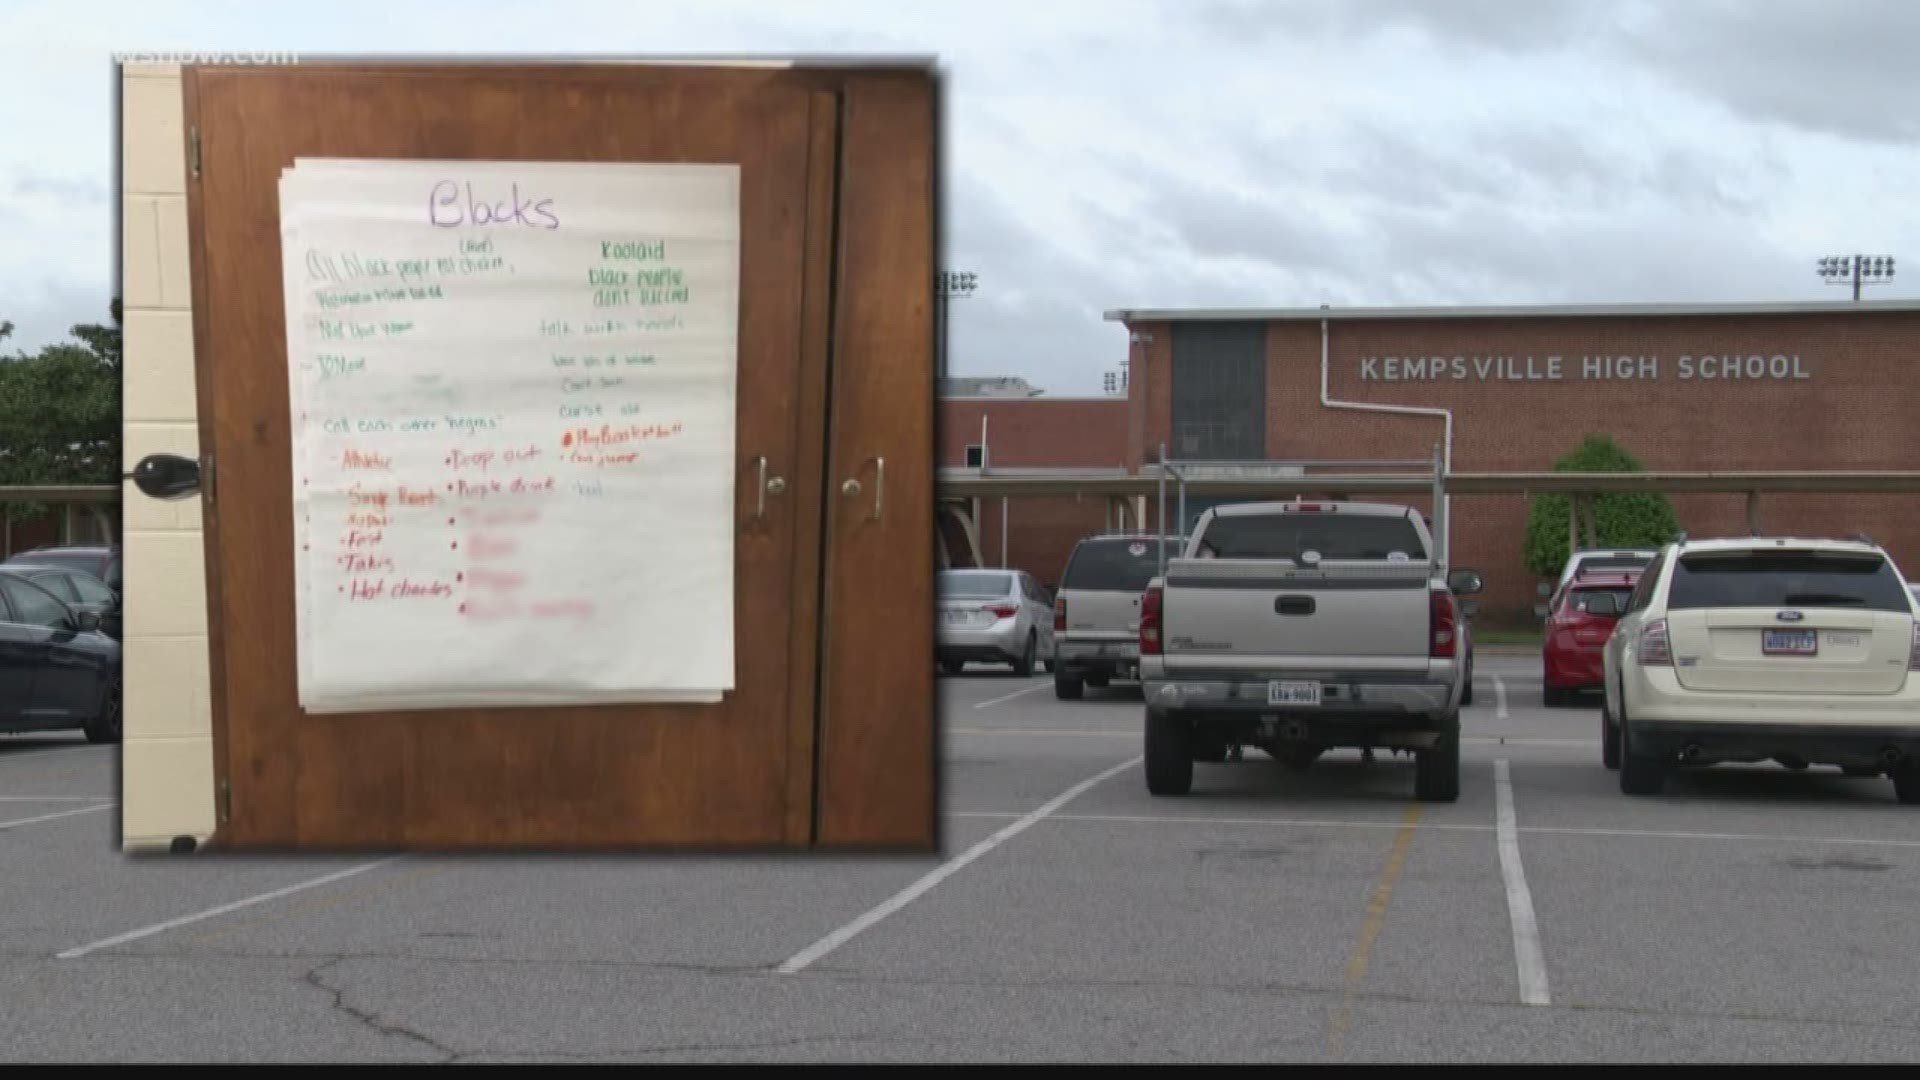 'We will not try to justify or defend' a controversial classroom assignment at Kempsville High School.